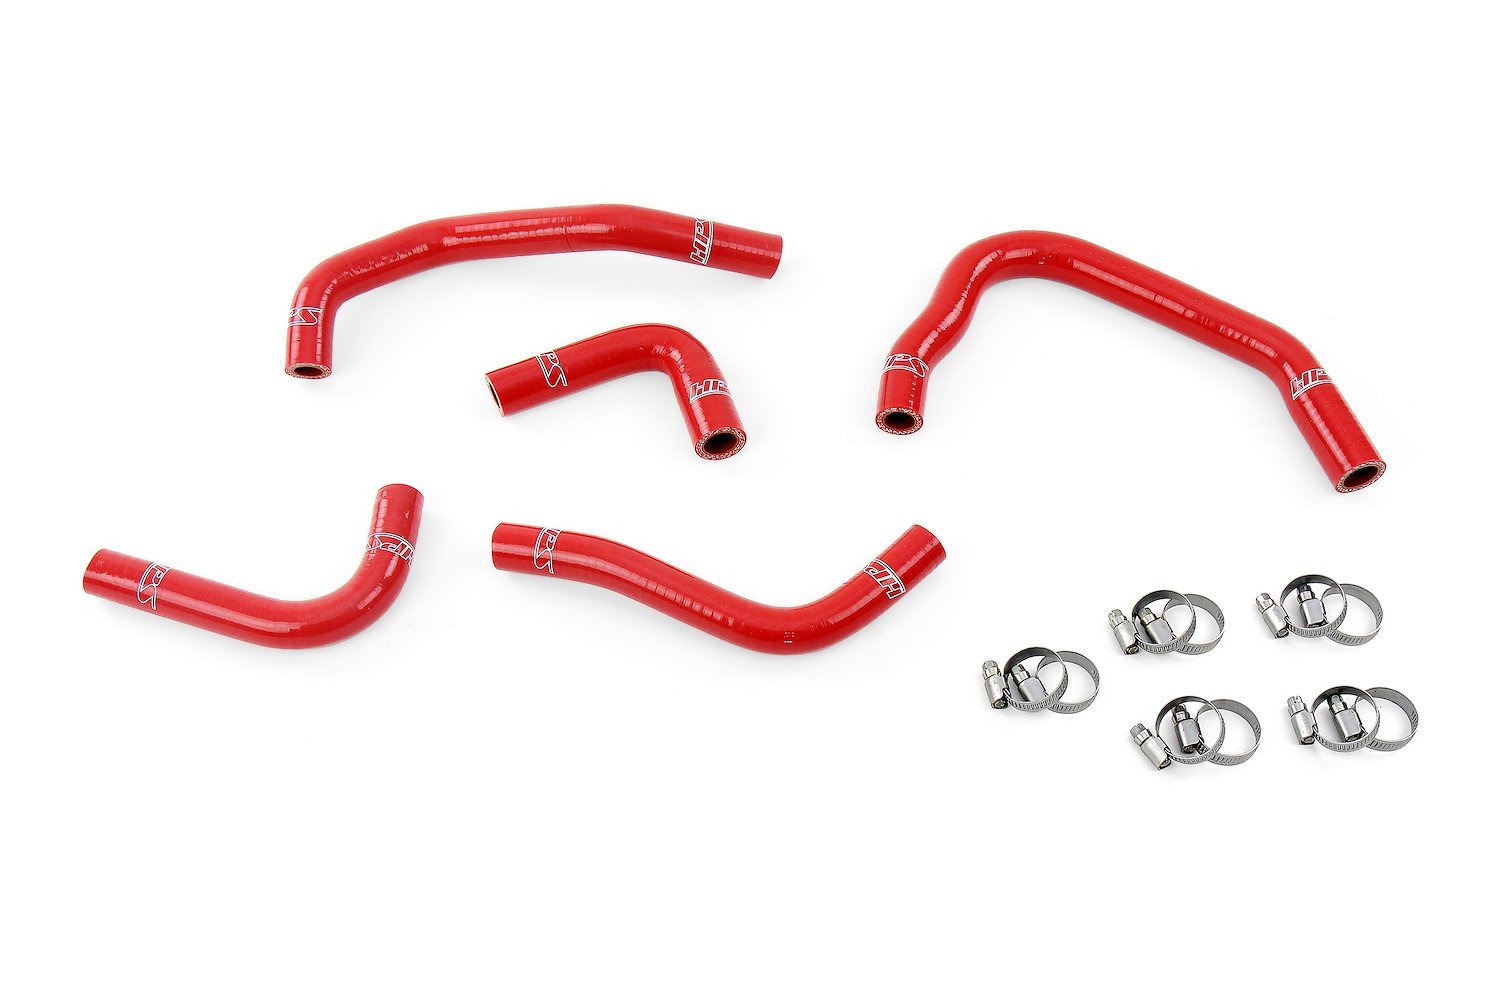 57-1285H-RED Heater Hose Kit, High-Temp 3-Ply Reinforced Silicone, Replace OEM Rubber Heater Coolant Hoses